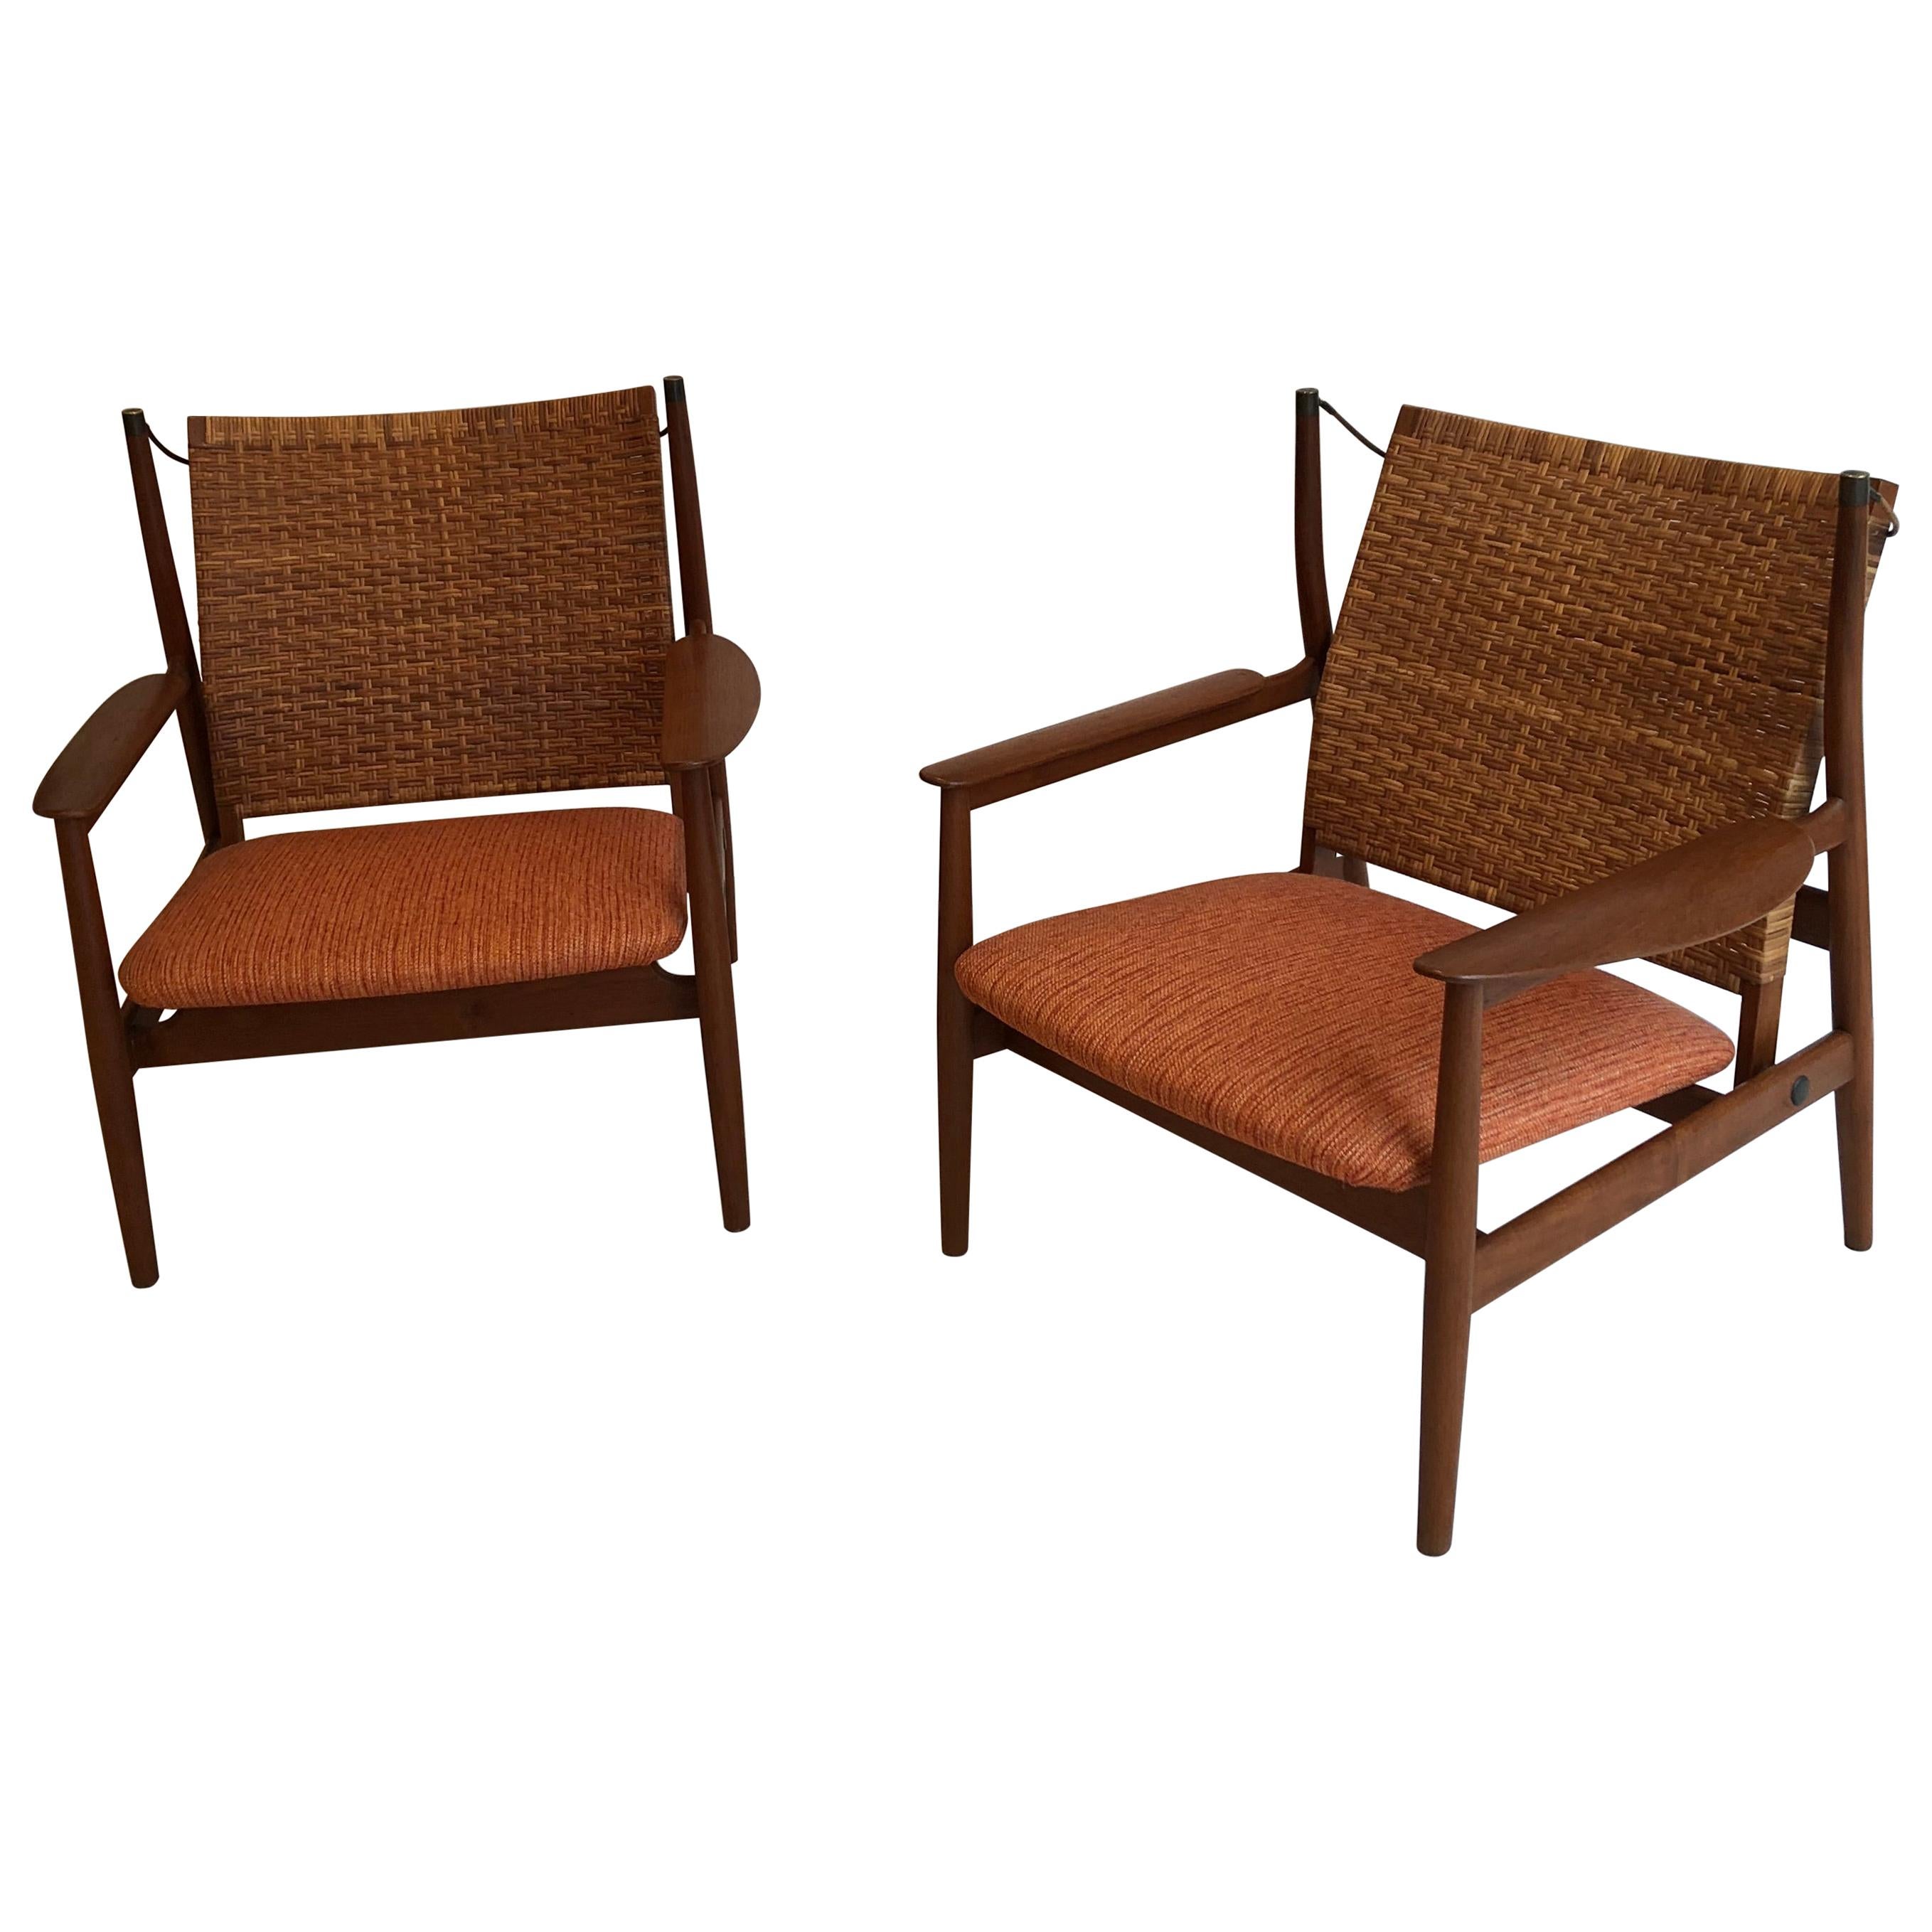 Finn Juhl Rare Pair of NV55 Armchairs in Teak and Cane for Niels Vodder, 1955